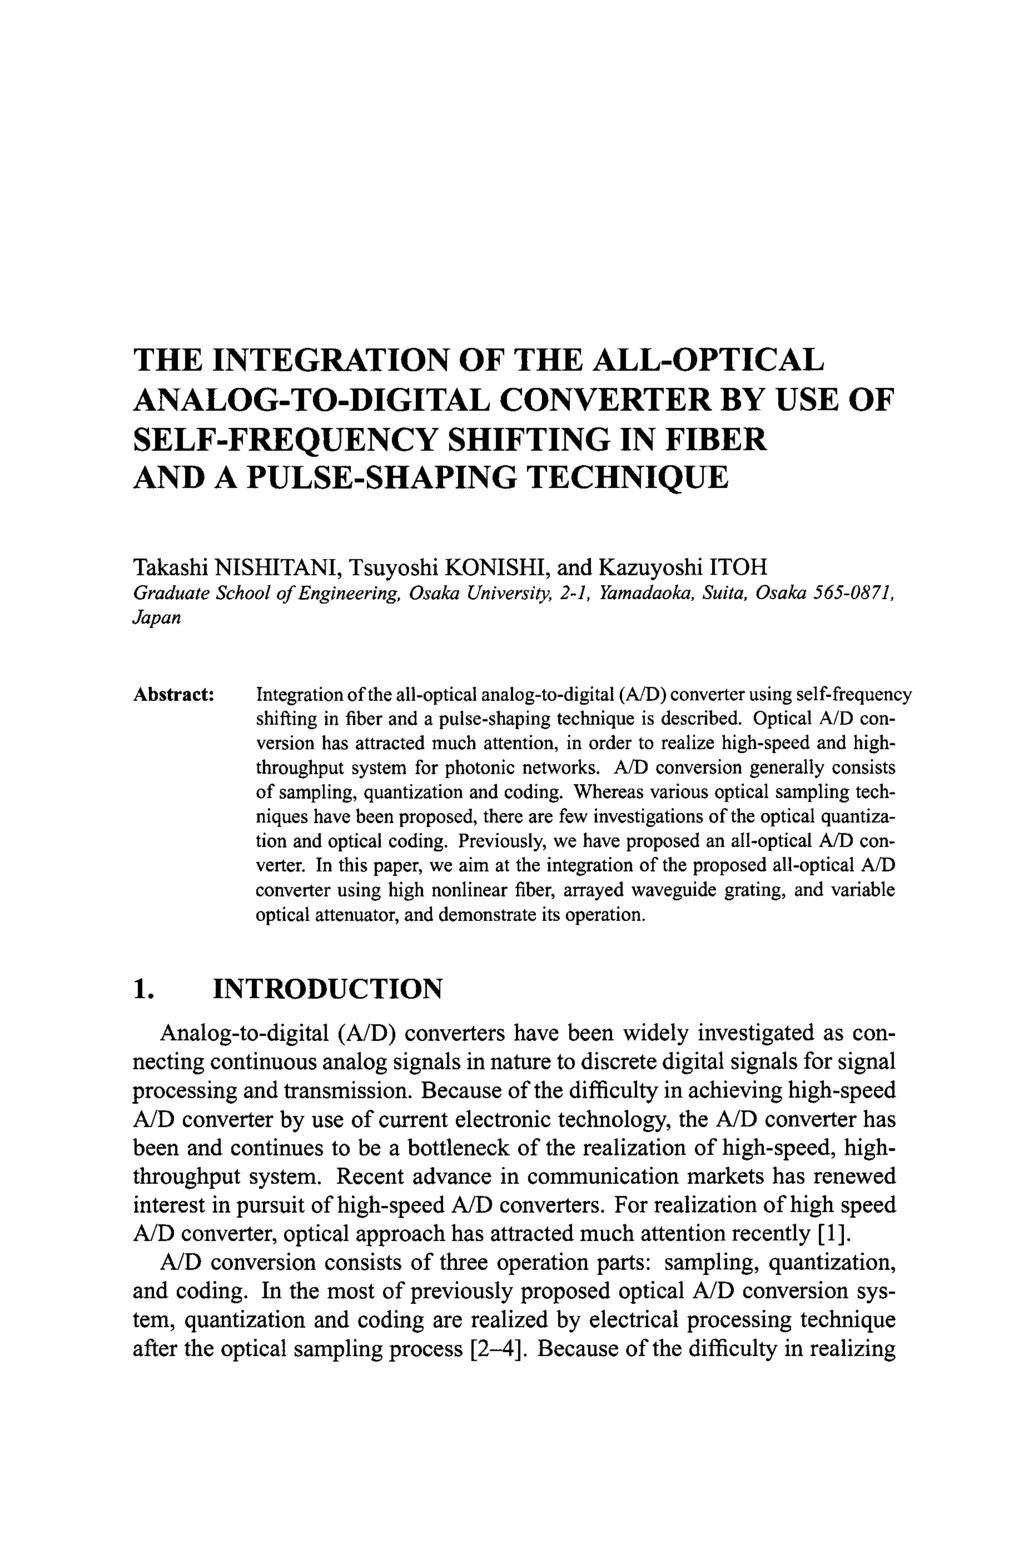 THE INTEGRATION OF THE ALL-OPTICAL ANALOG-TO-DIGITAL CONVERTER BY USE OF SELF-FREQUENCY SHIFTING IN FIBER AND A PULSE-SHAPING TECHNIQUE Takashi NISHITANI, Tsuyoshi KONISHI, and Kazuyoshi ITOH